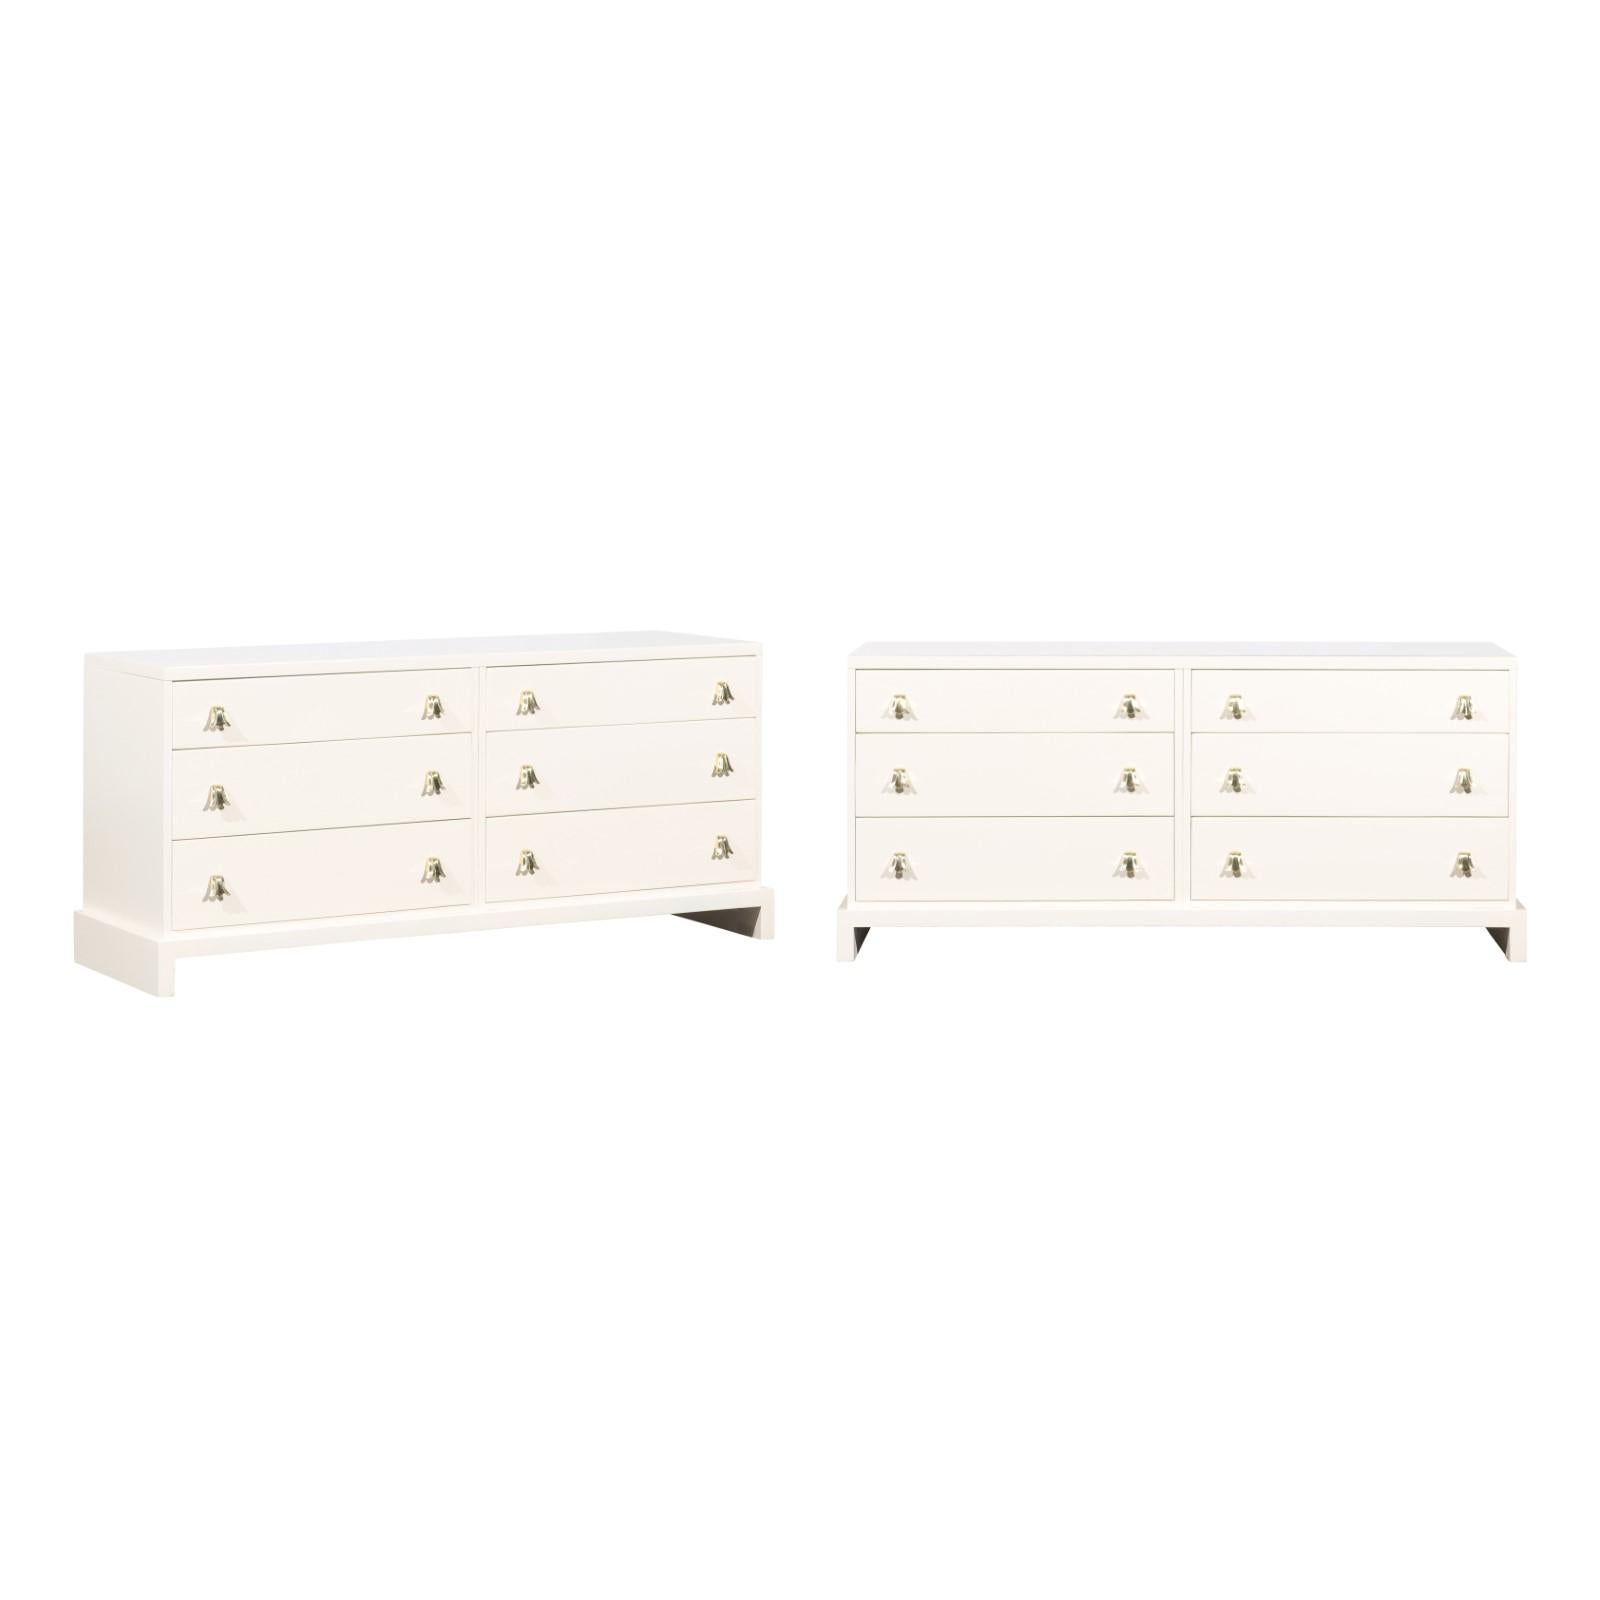 Breathtaking Restored Art Deco Chest by Widdicomb, circa 1950- Pair Available For Sale 12